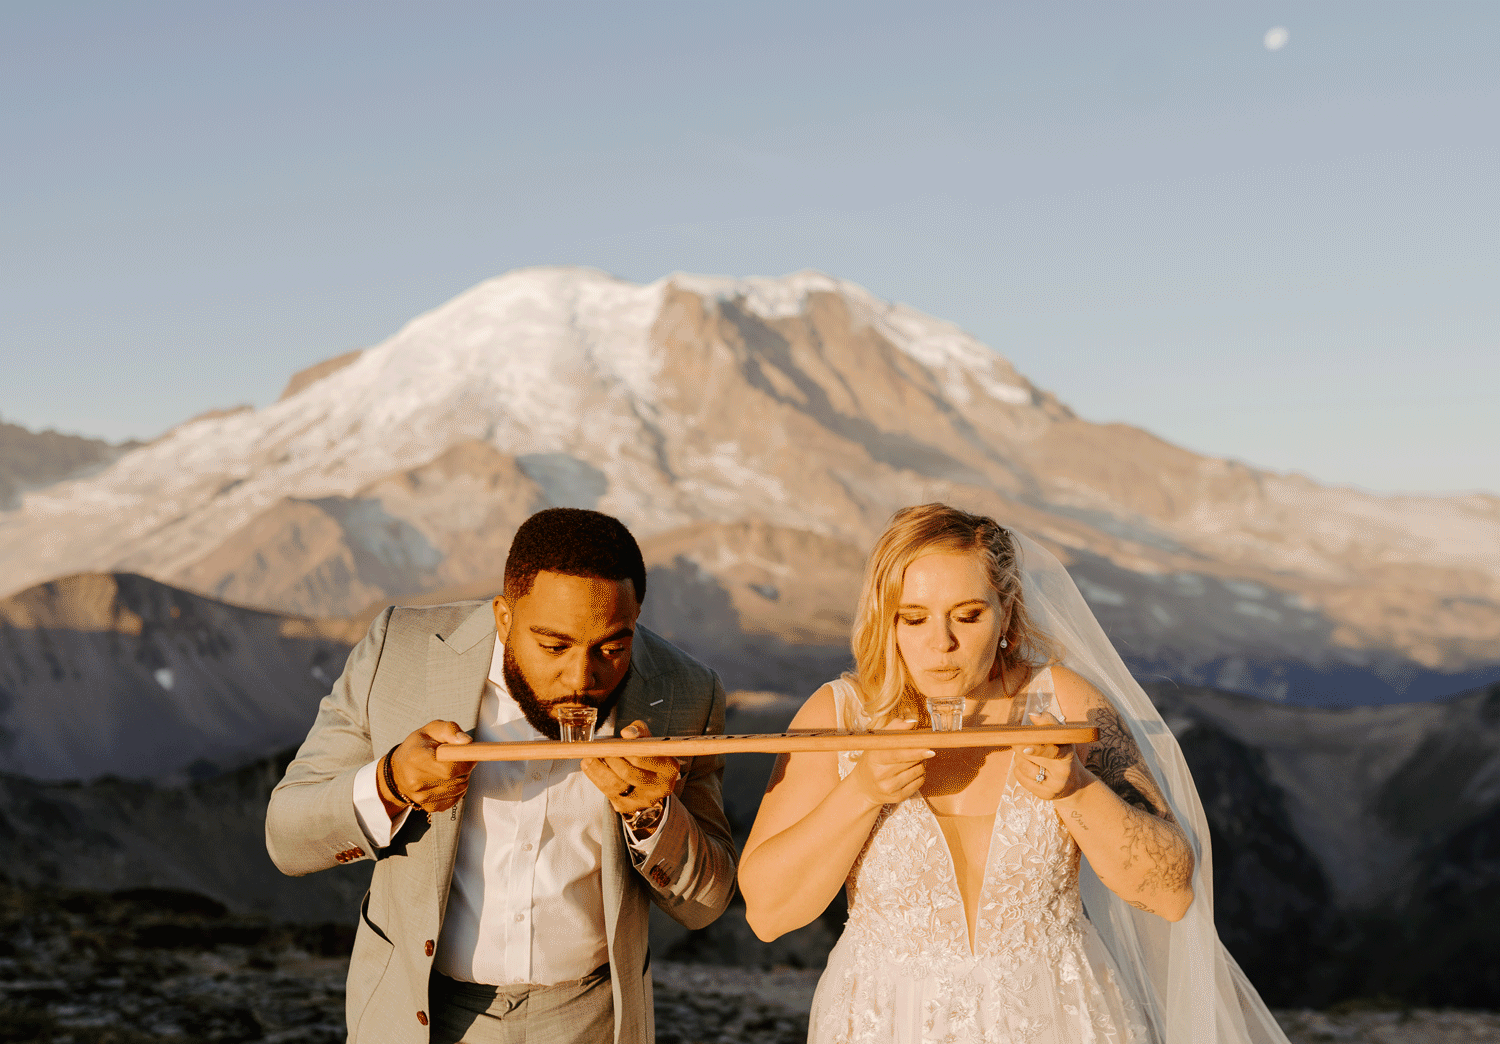 Bride and groom drinking shots in front of a mountain